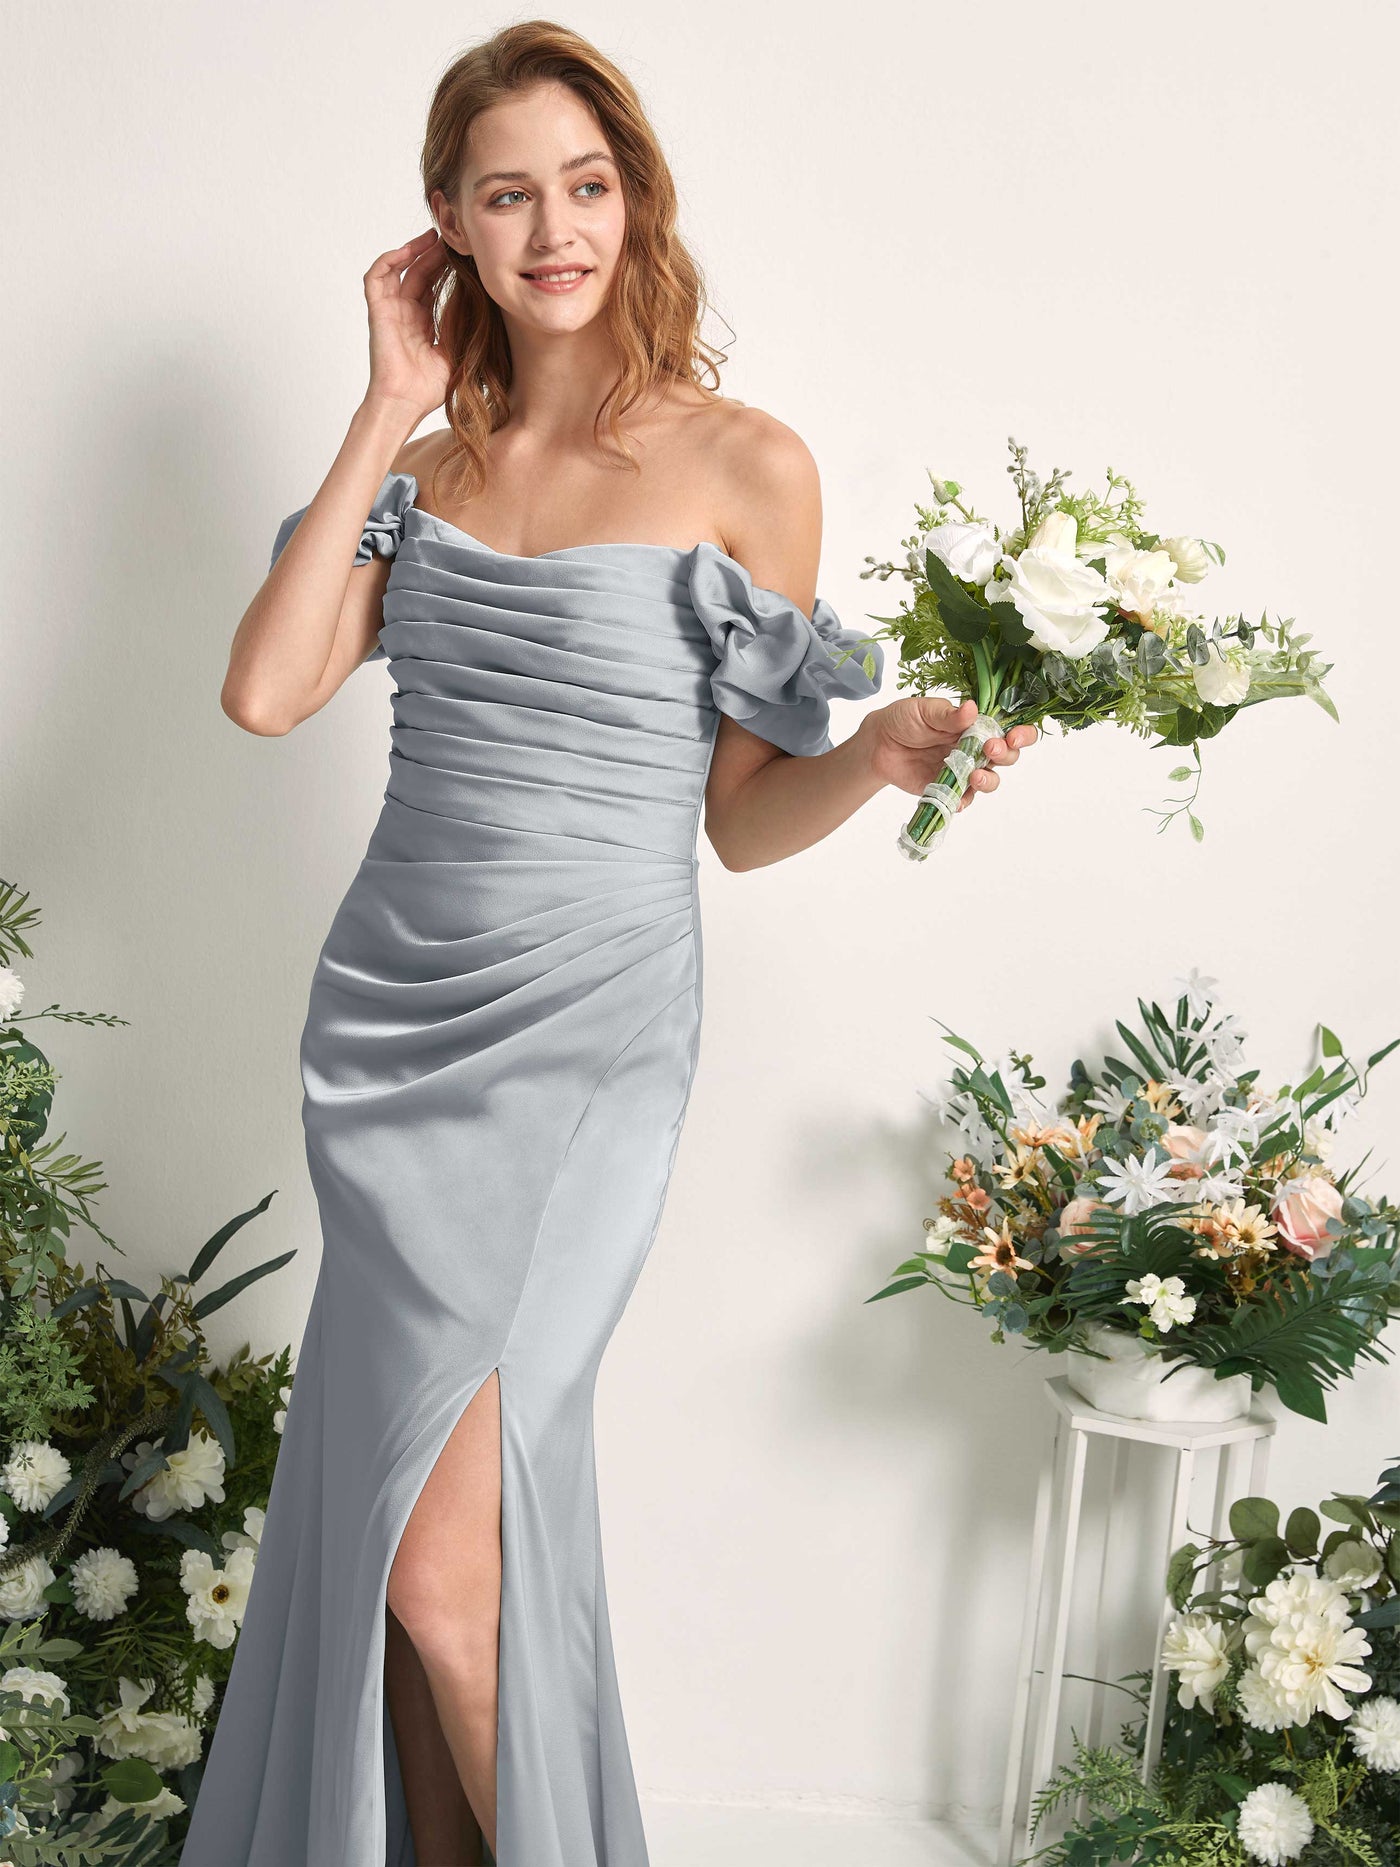 Baby Blue Bridesmaid Dresses Bridesmaid Dress A-line Satin Off Shoulder Full Length Short Sleeves Wedding Party Dress (80226401)#color_baby-blue